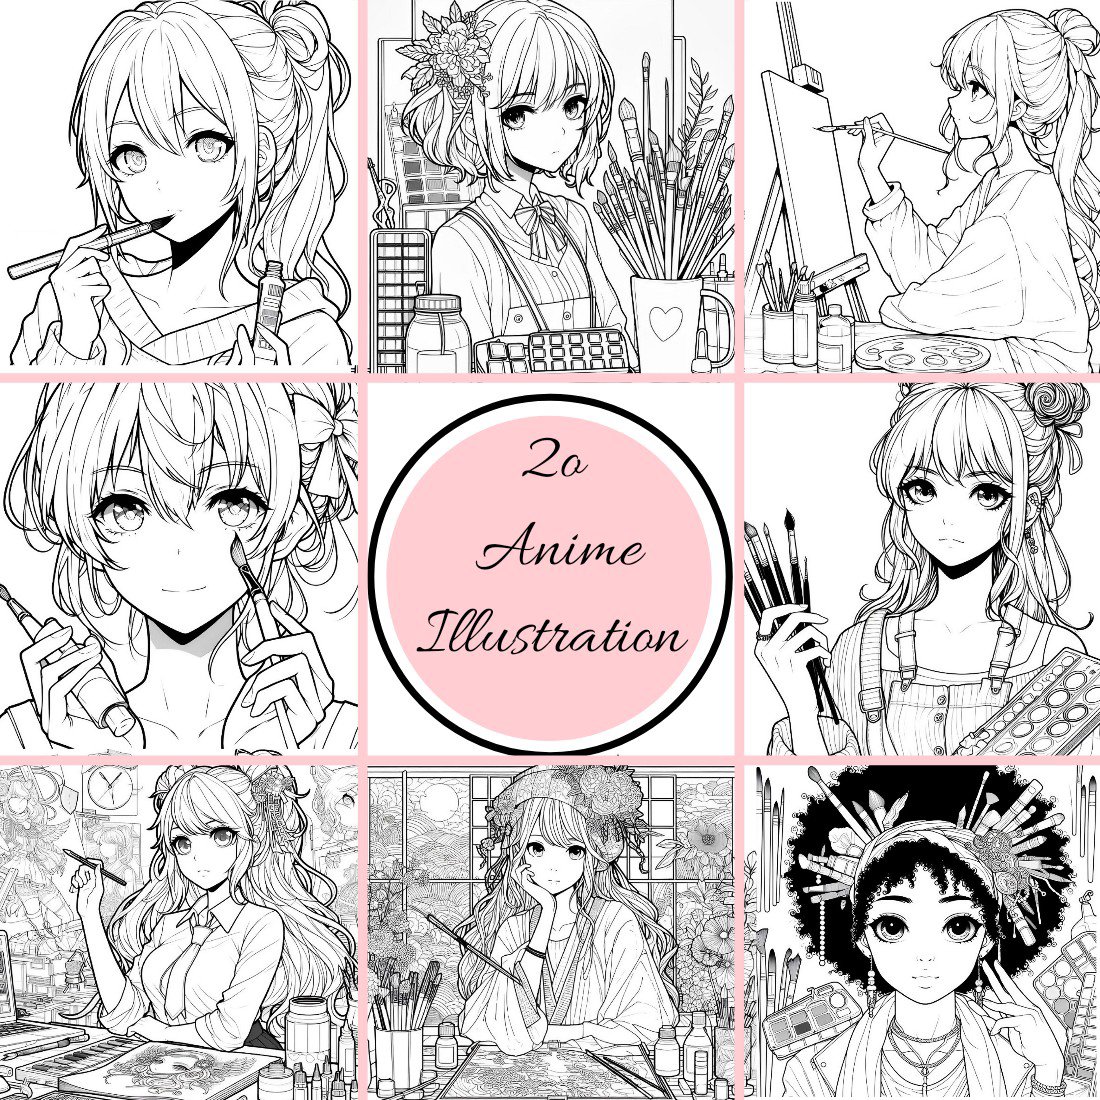 Anime Artistry Collection: 20 Exquisite Digital Coloring Pages - Instant Download PDF and JPG - Manga Girls, Anime Illustrations, Best Seller, Unique Creations, New Releases, Top-Rated Digital Book for Creative Enthusiasts cover image.